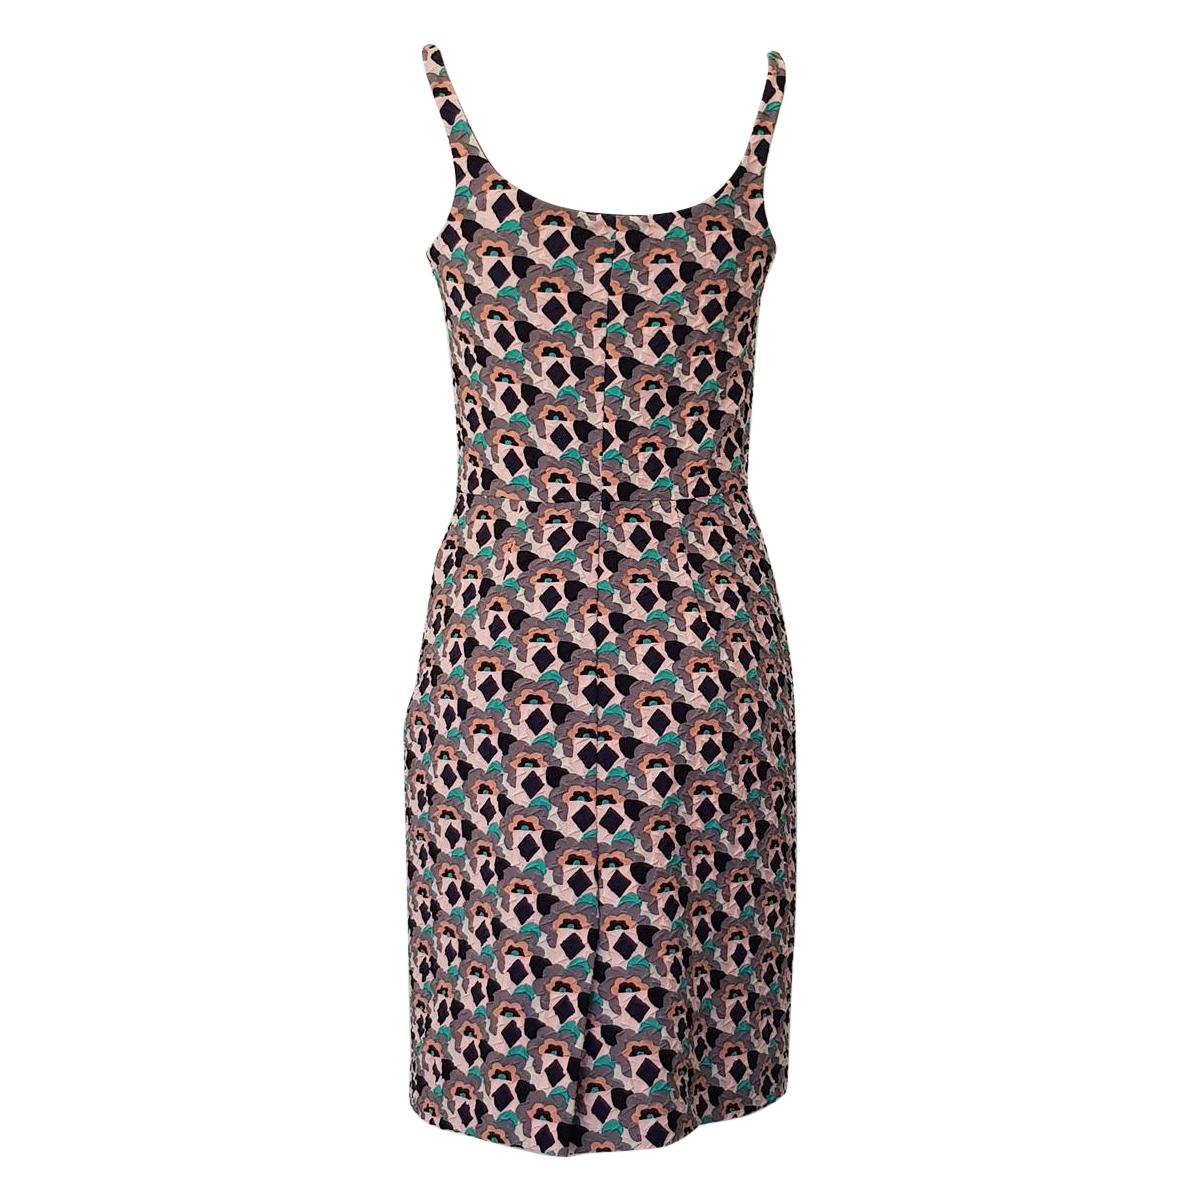 Chic Prada embossed dress
Polyamide (95%) and elasthane
Multicolored
Fancy pattern
Total length cm 92 (36.2 inches)
Worldwide express shipping included in the price !